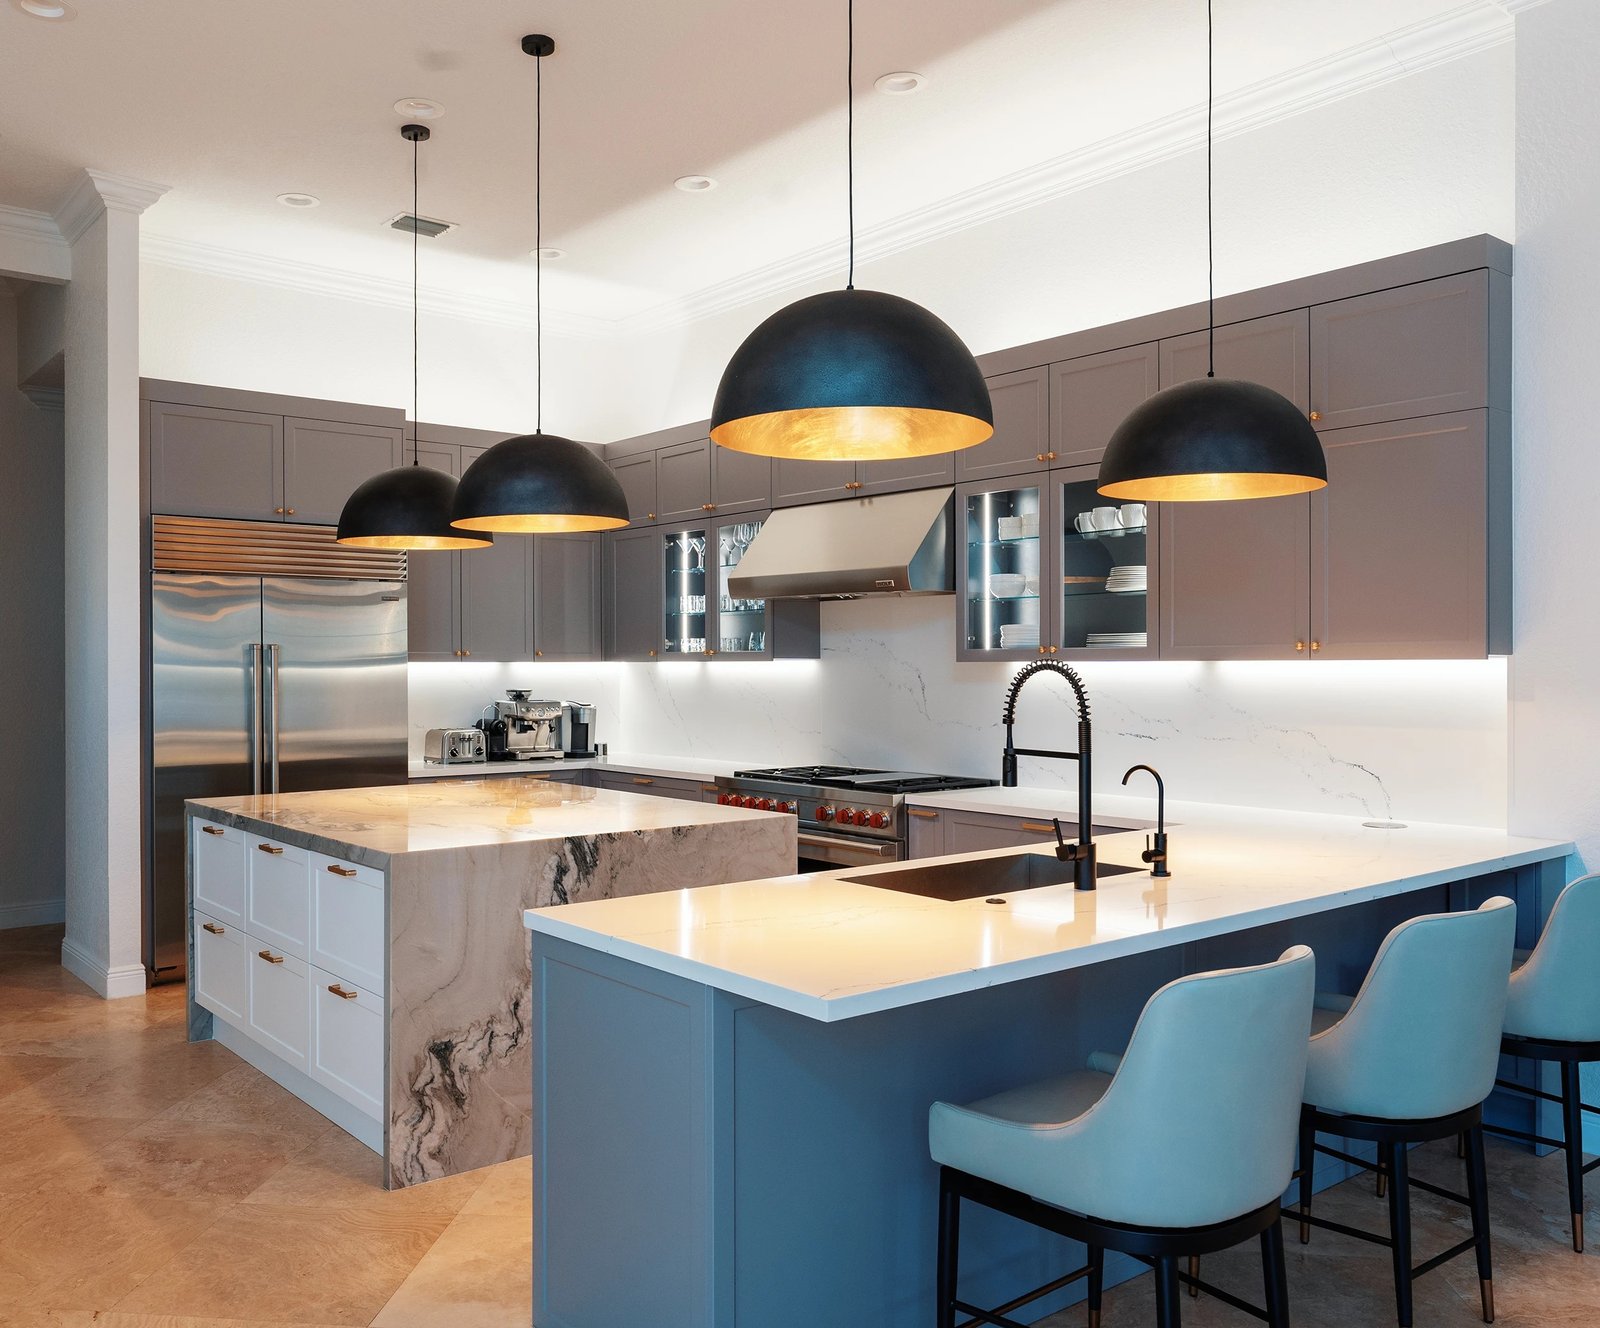 A modern kitchen with a large island showcasing the best ways to use various cabinet materials.